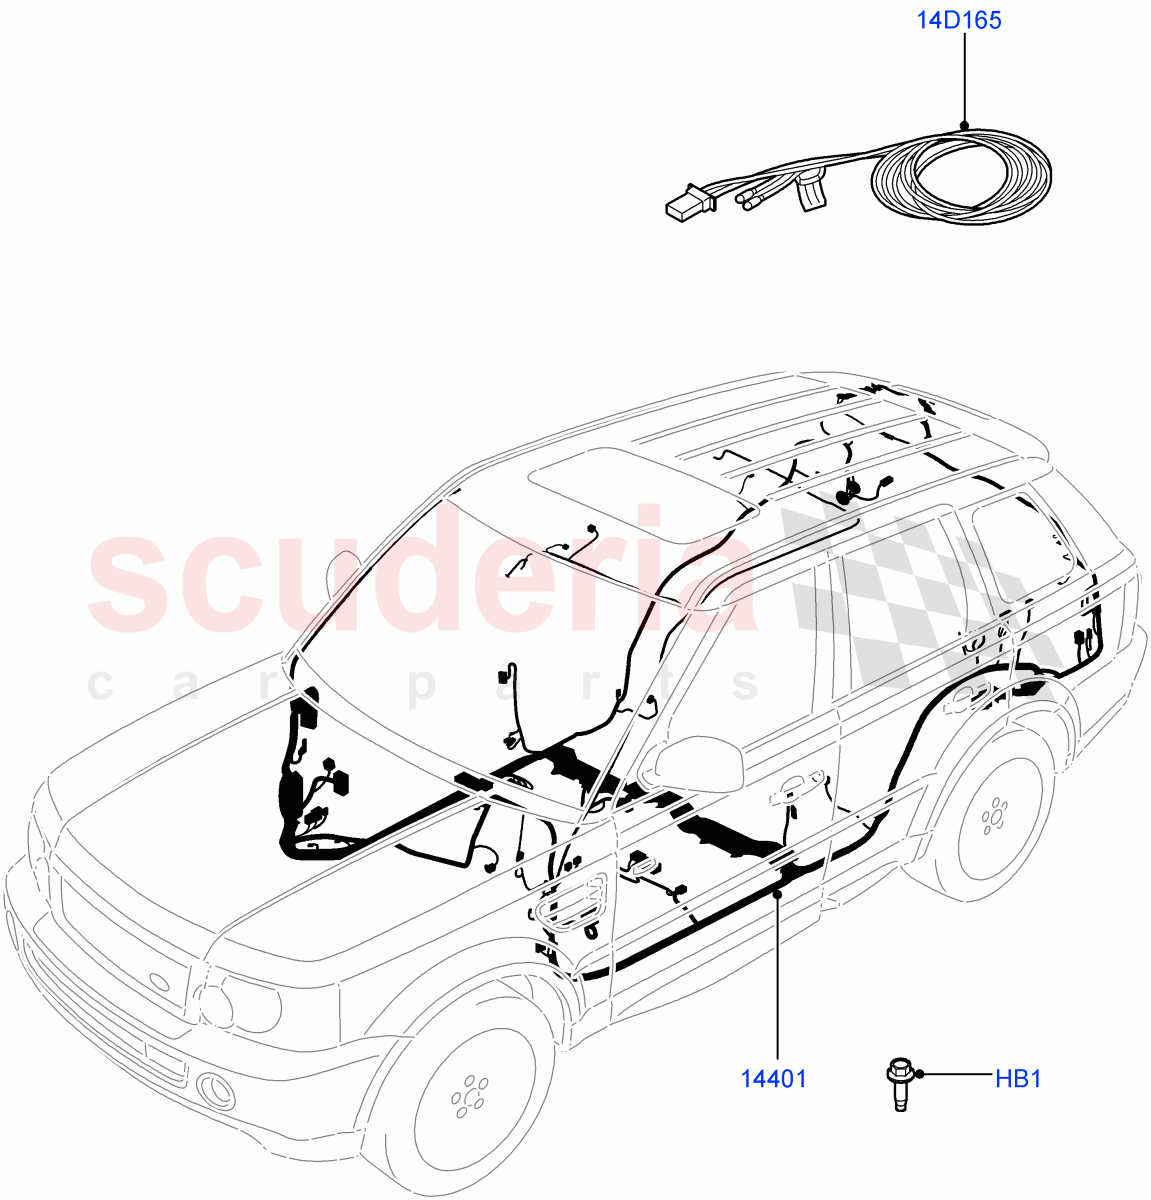 Electrical Wiring - Engine And Dash(Main Harness)((V)FROMAA000001,(V)TOAA999999) of Land Rover Land Rover Range Rover Sport (2010-2013) [3.6 V8 32V DOHC EFI Diesel]